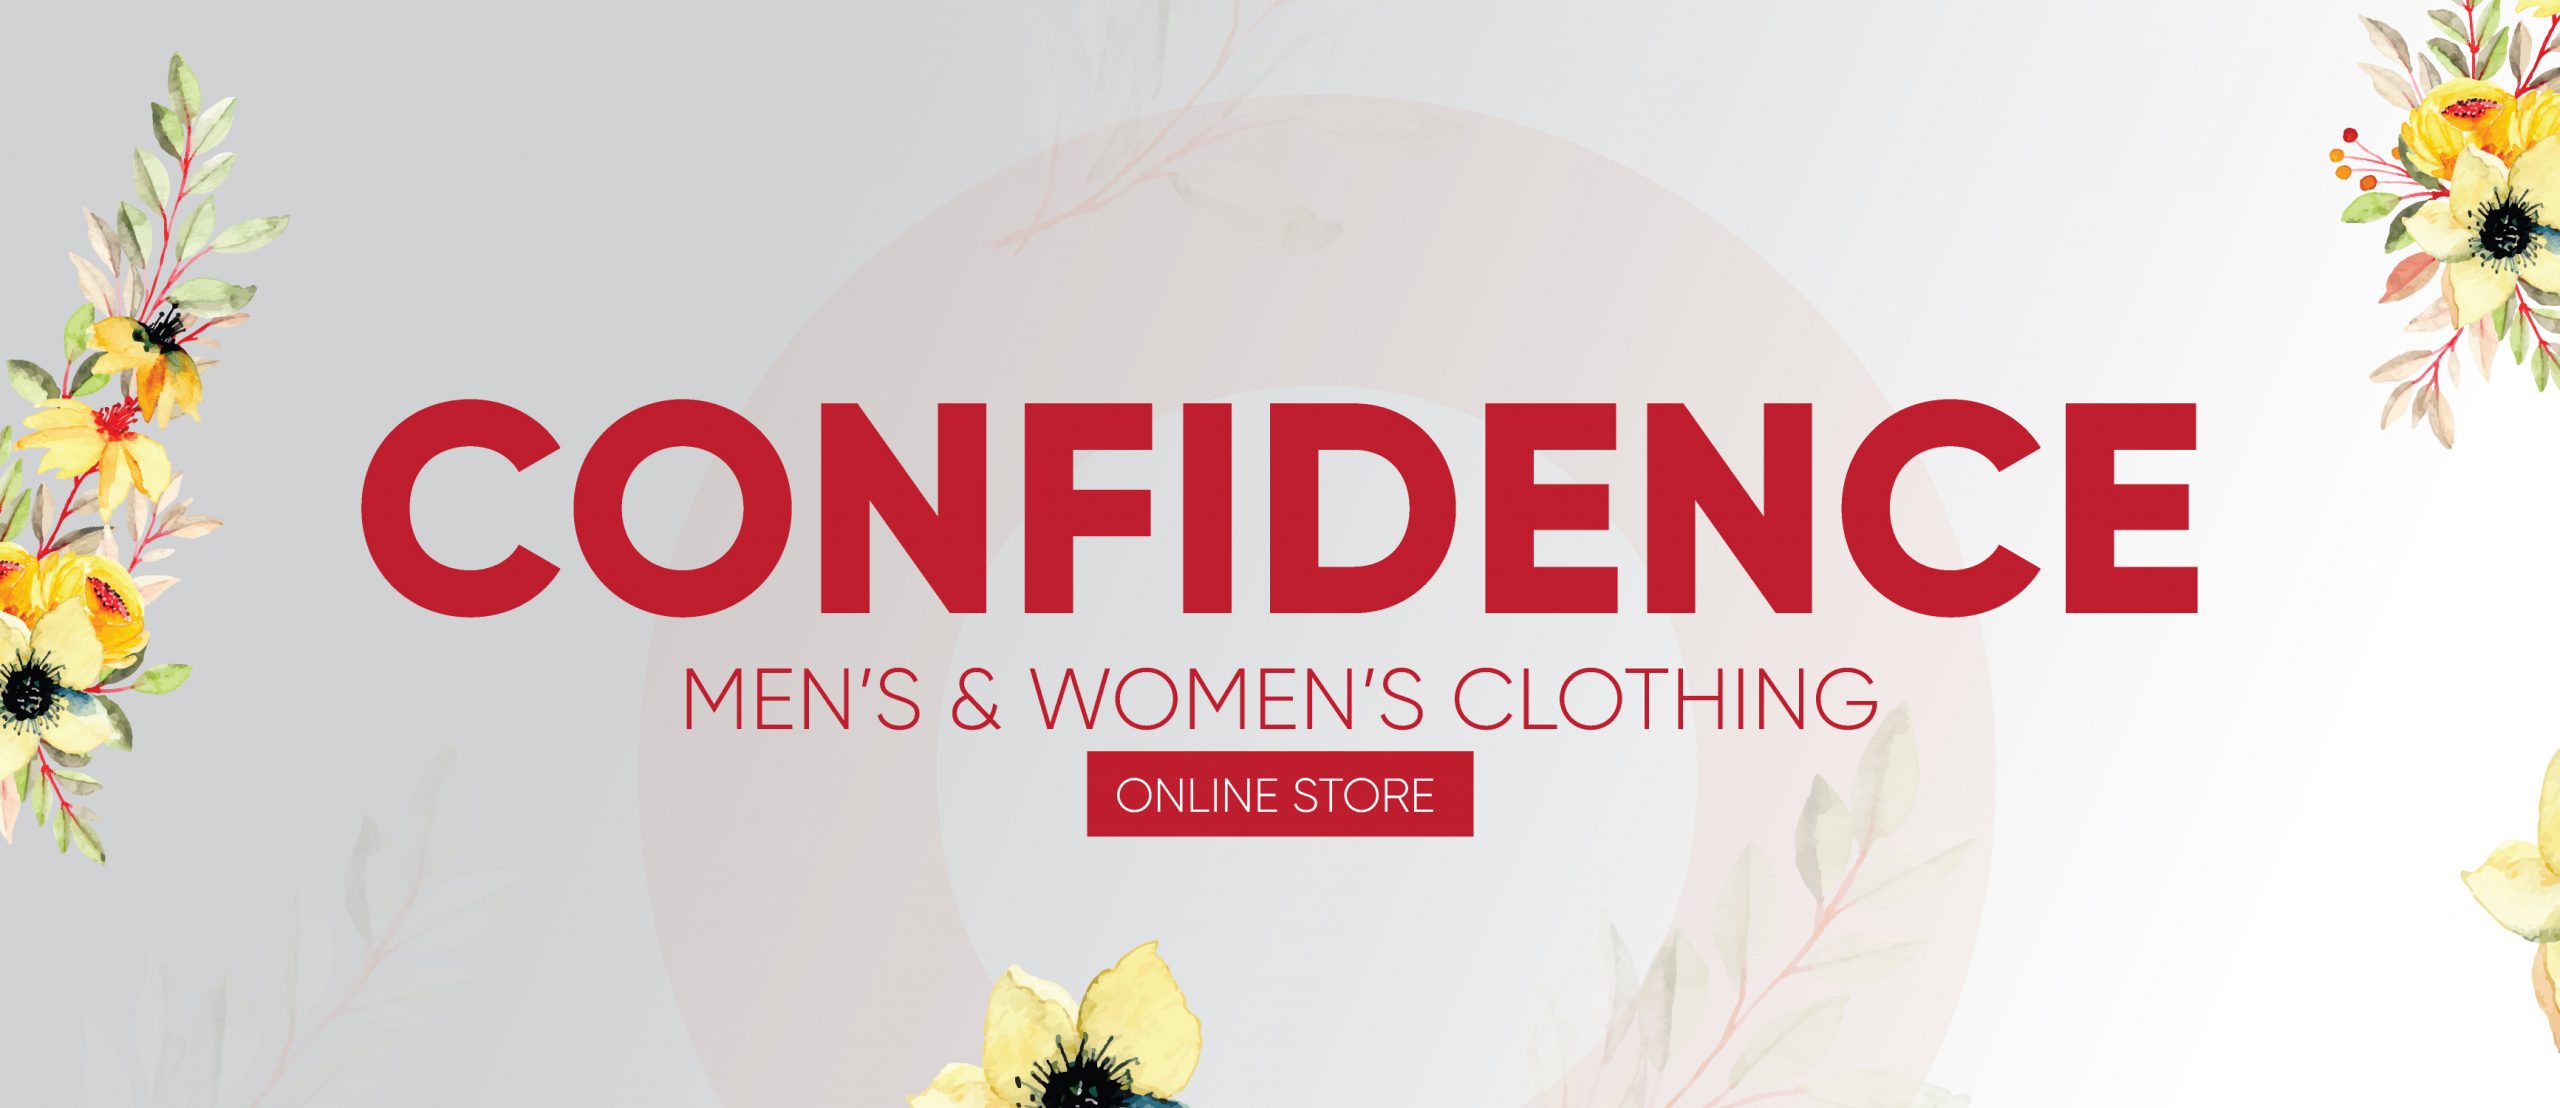 About Us – Confidence Store